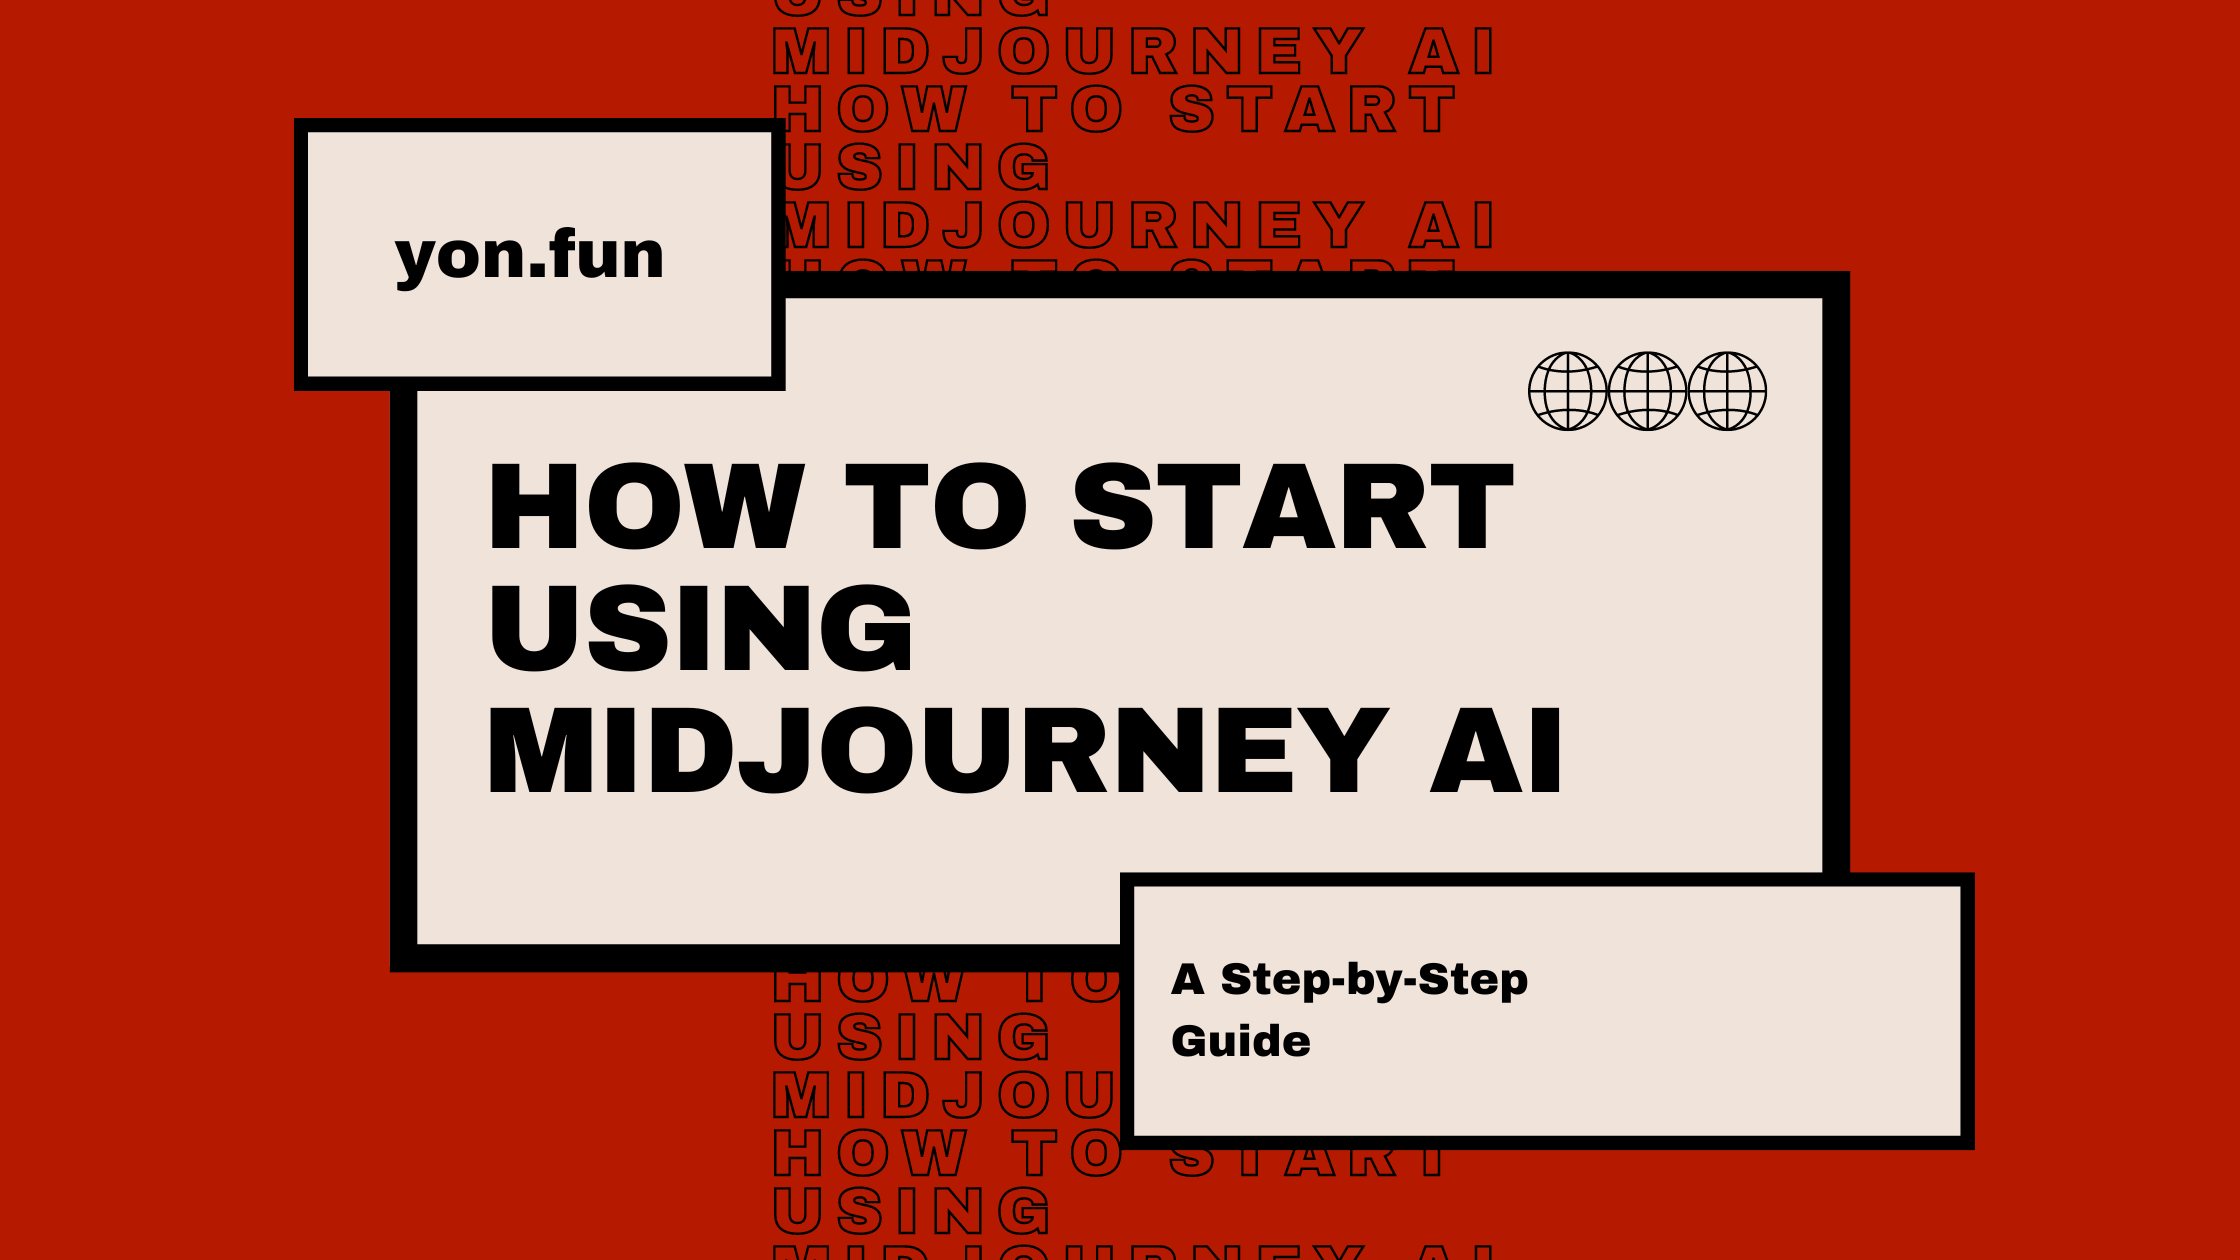 How to use Midjourney